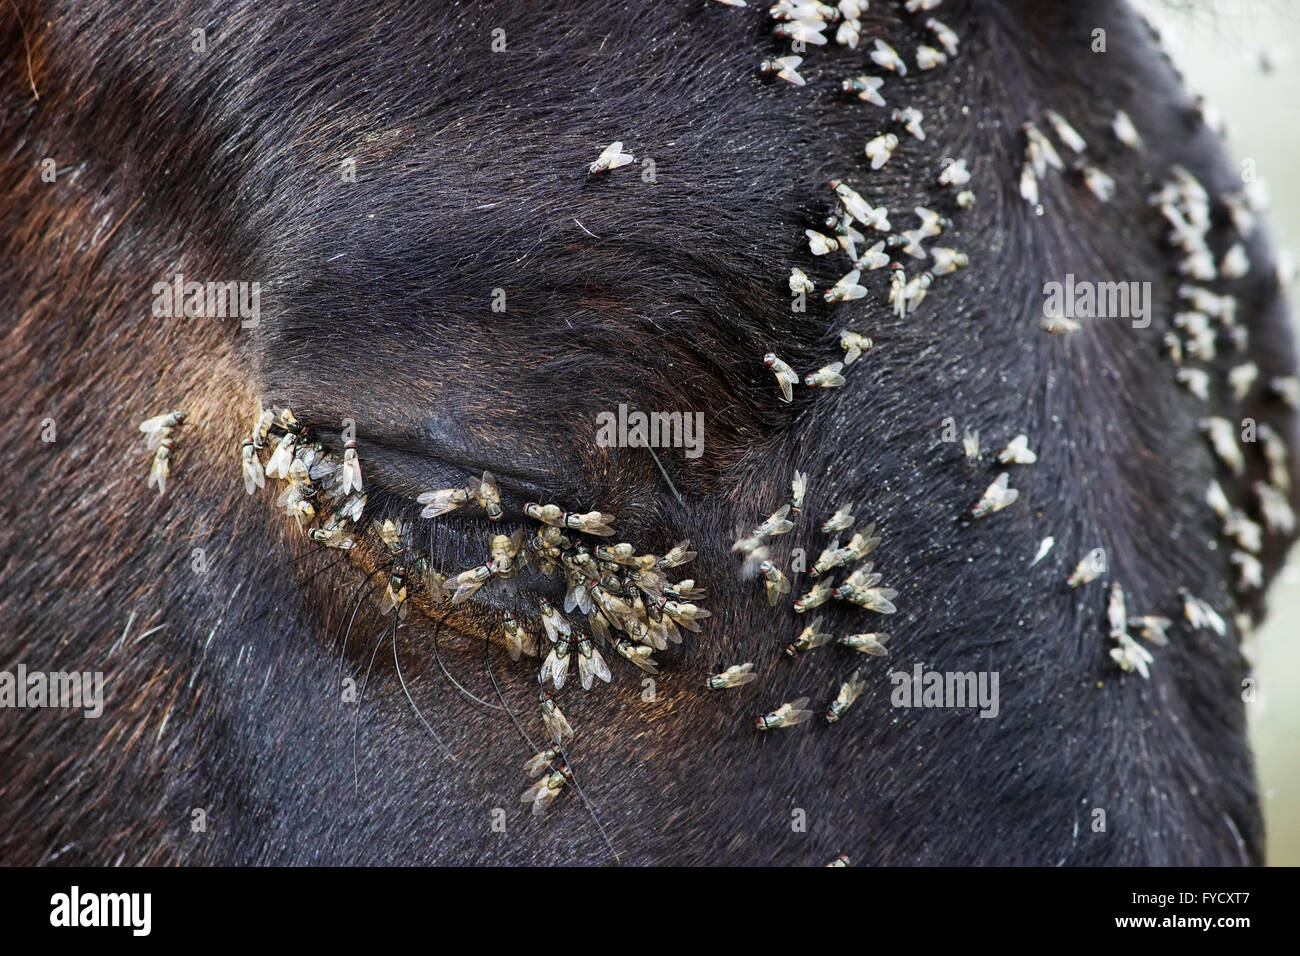 Horse squeezes its eye lids showing its discomfort against the swarm of flies dining around its eye's  tear gland ducts Stock Photo